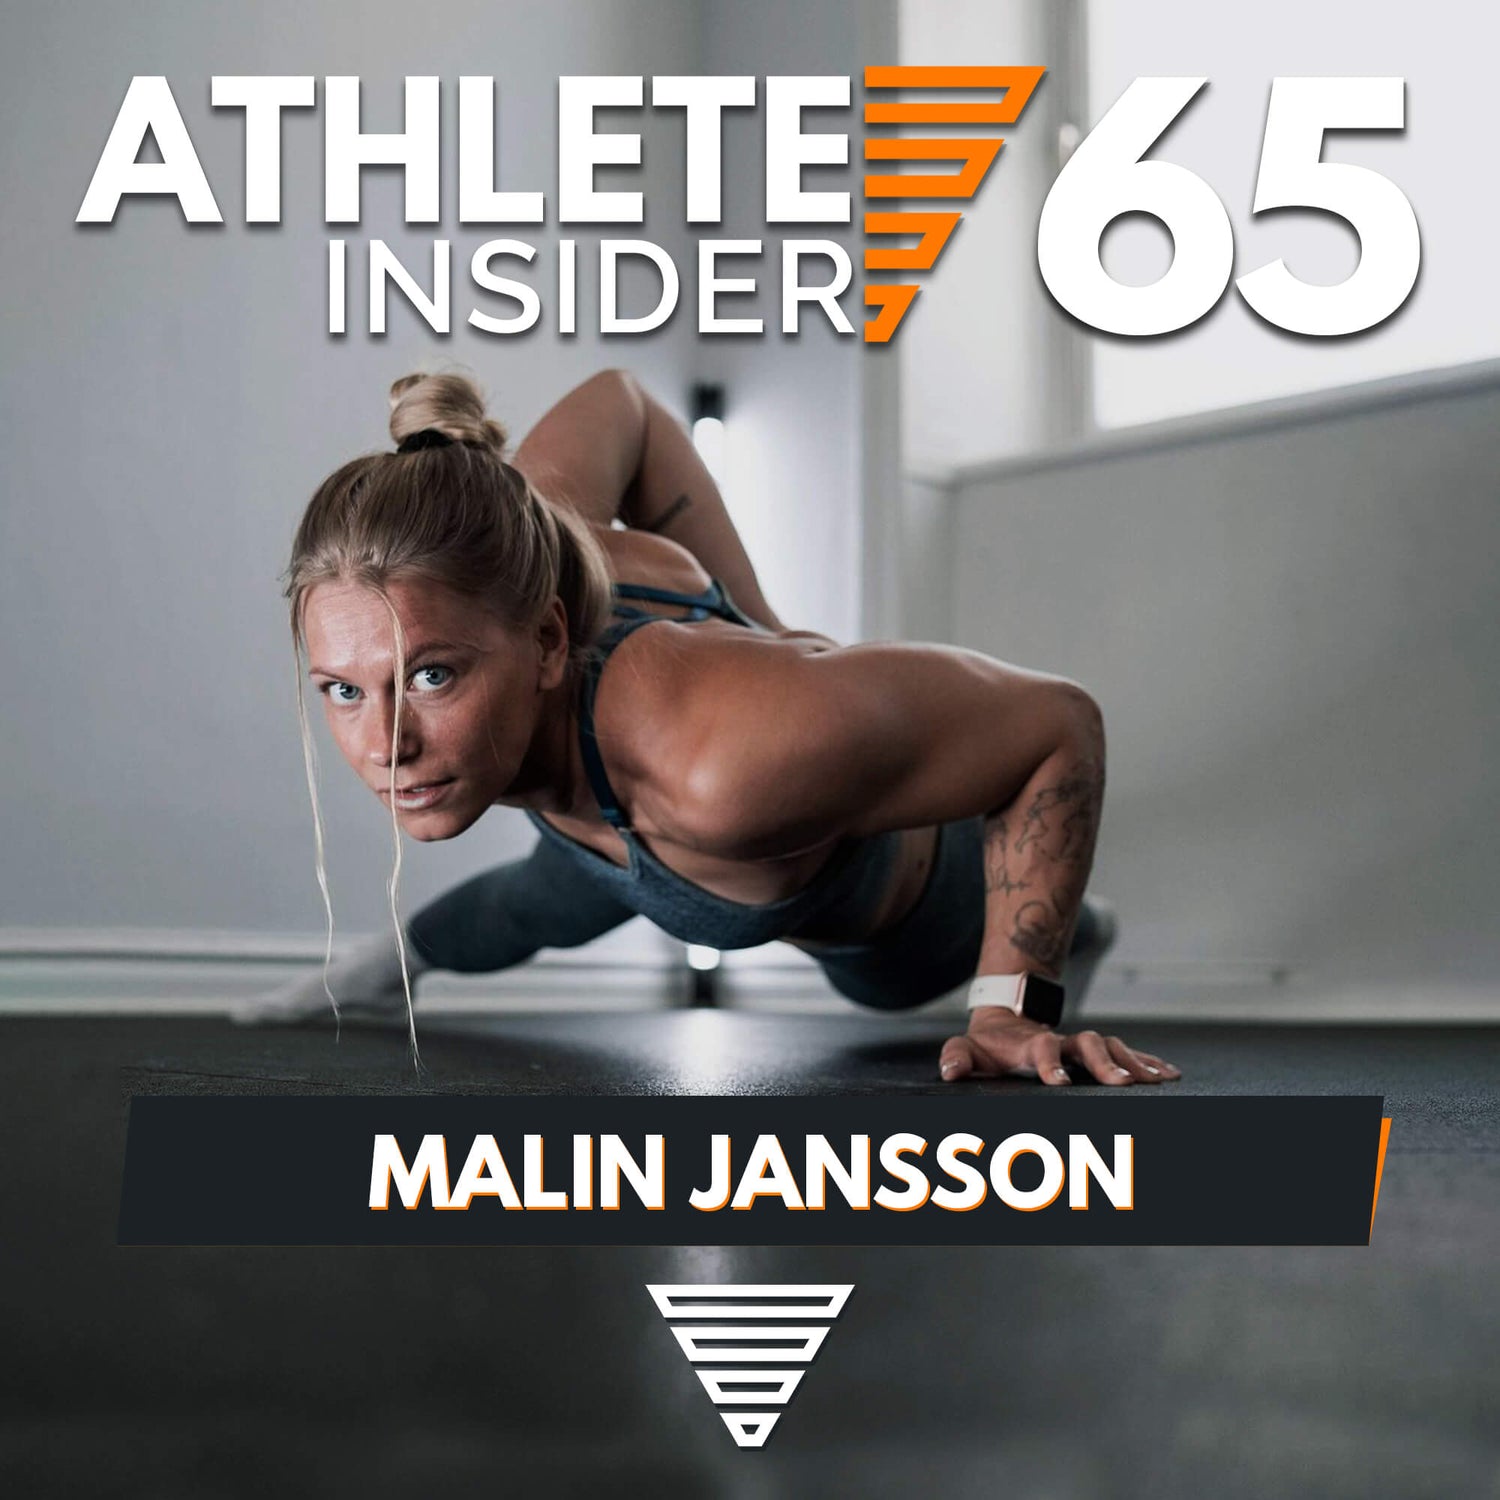 SWEDISH FREESTYLE BEAST | Interview with Malin Jansson | Athlete Insider Podcast #65